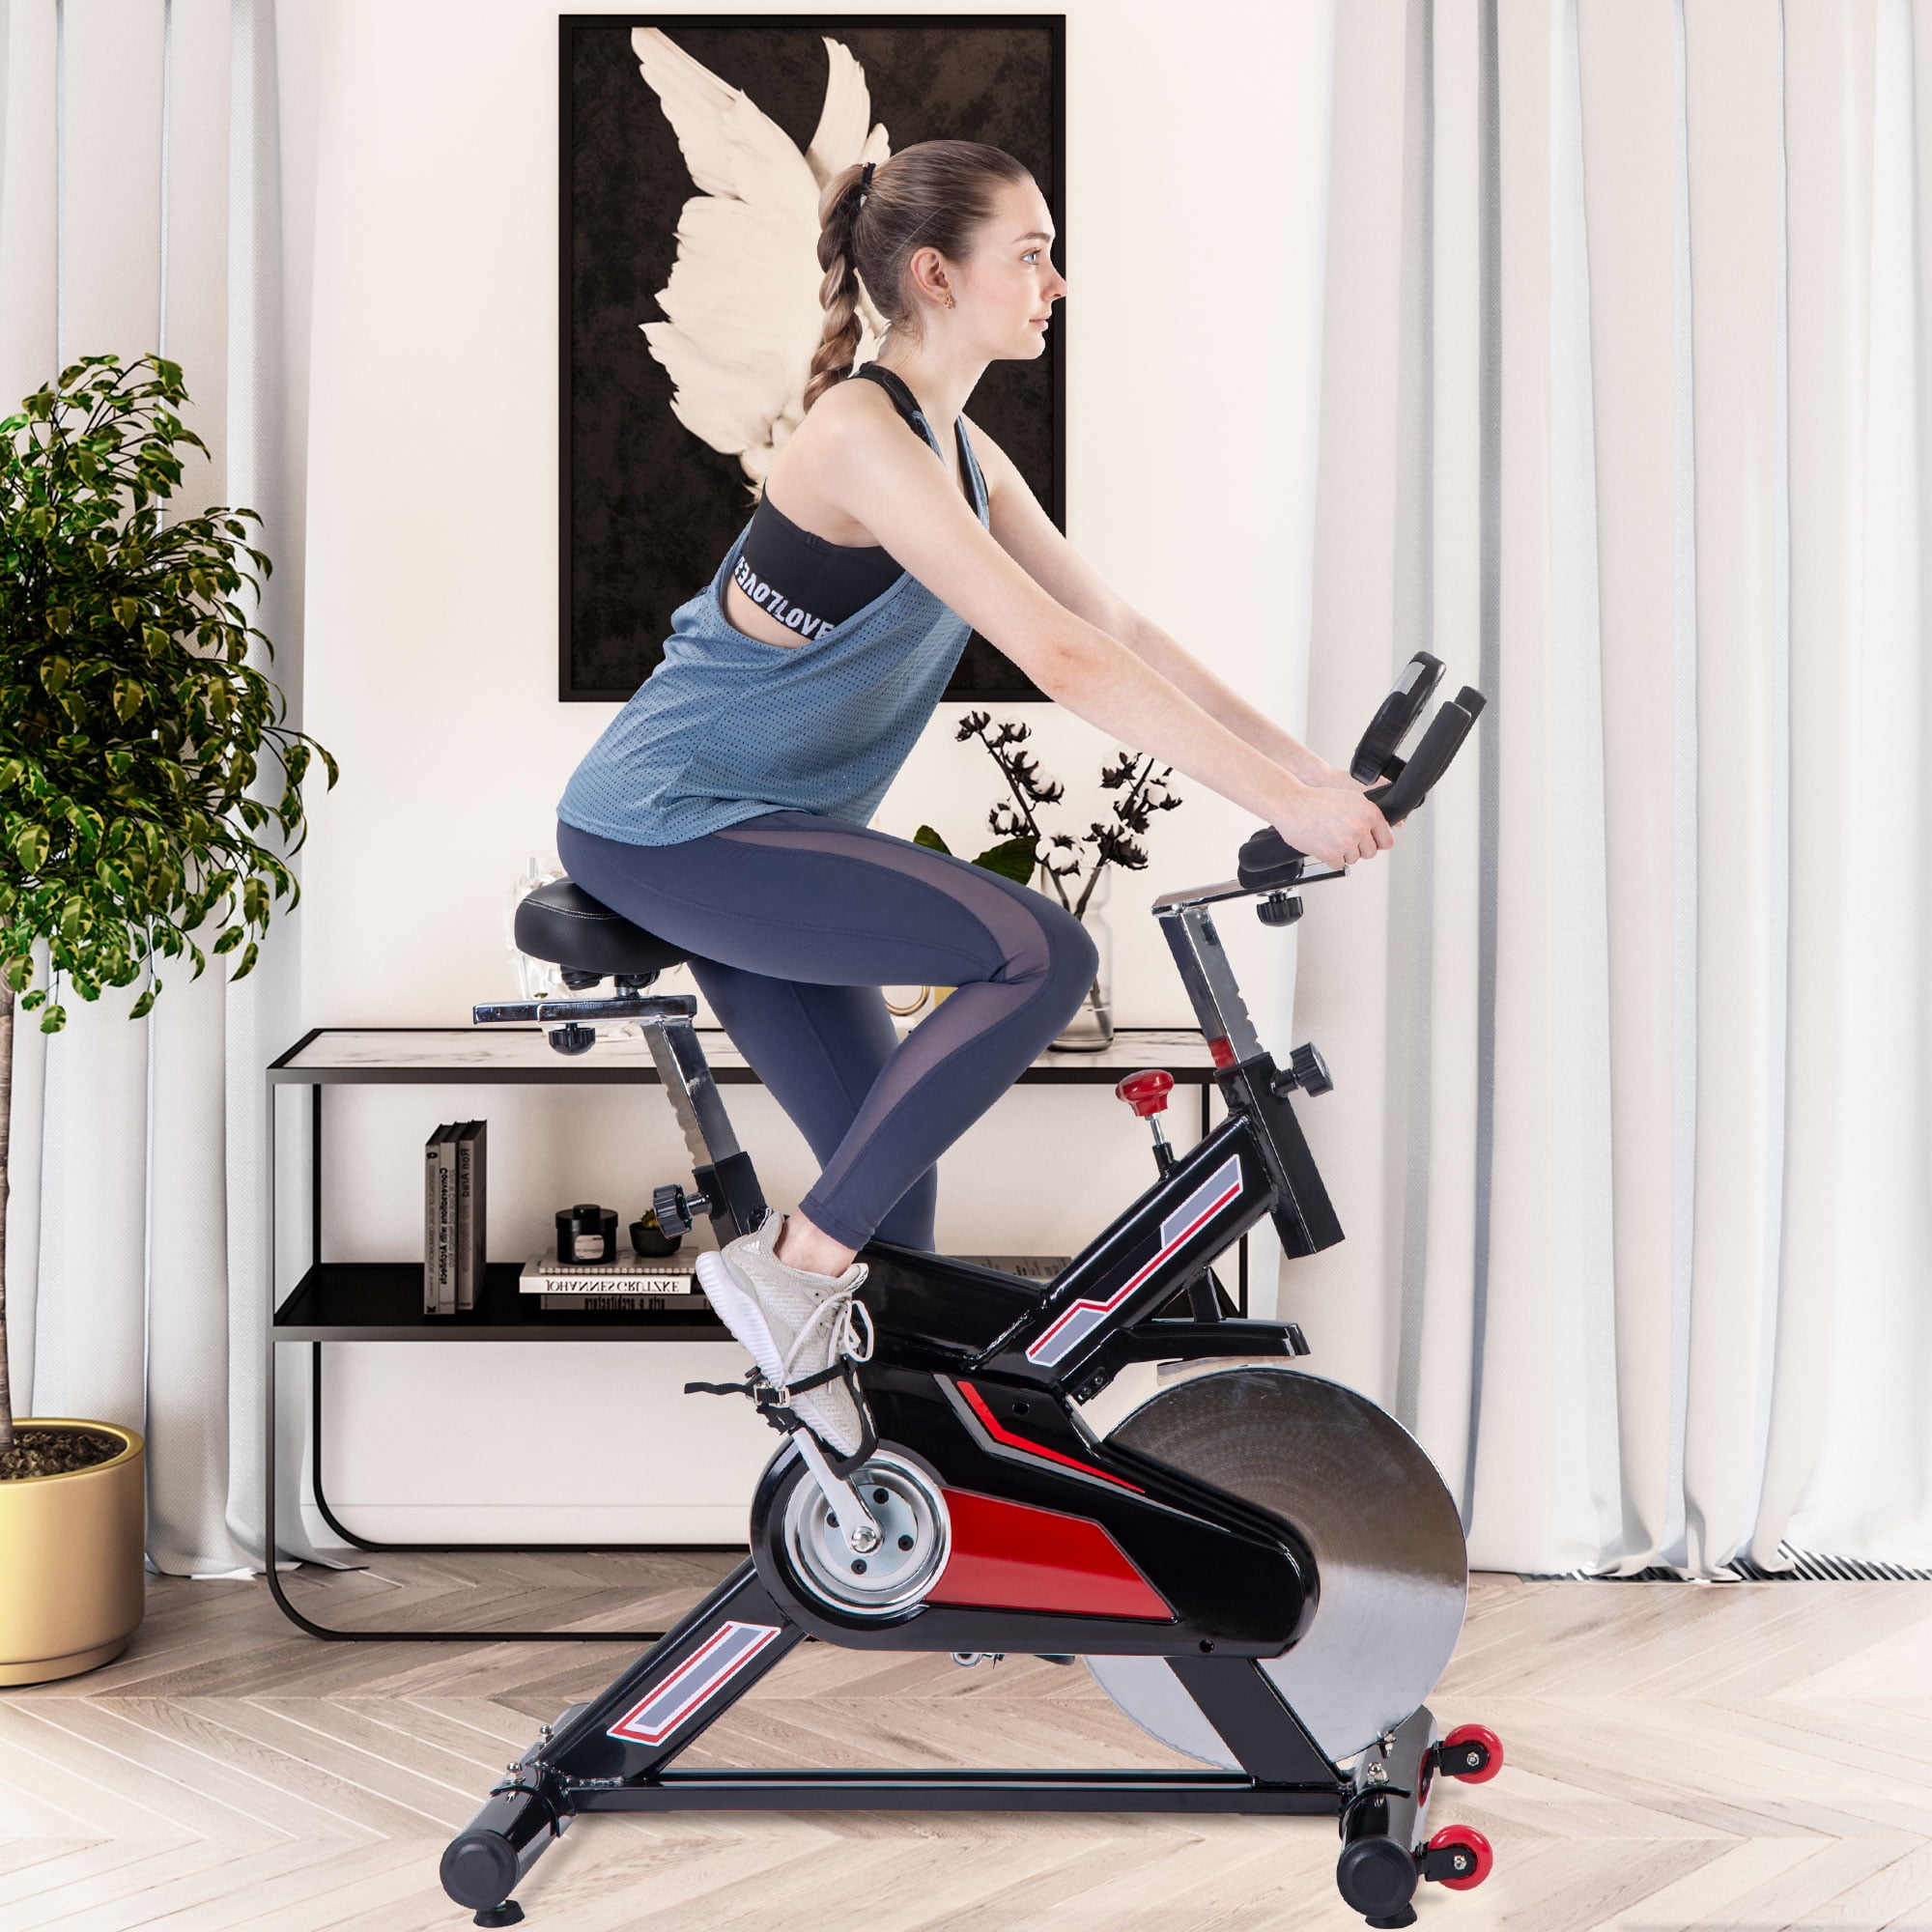 Home Exercise Bike Stationary Bicycle Indoor Cycling Cardio Fitness Workout Gym 